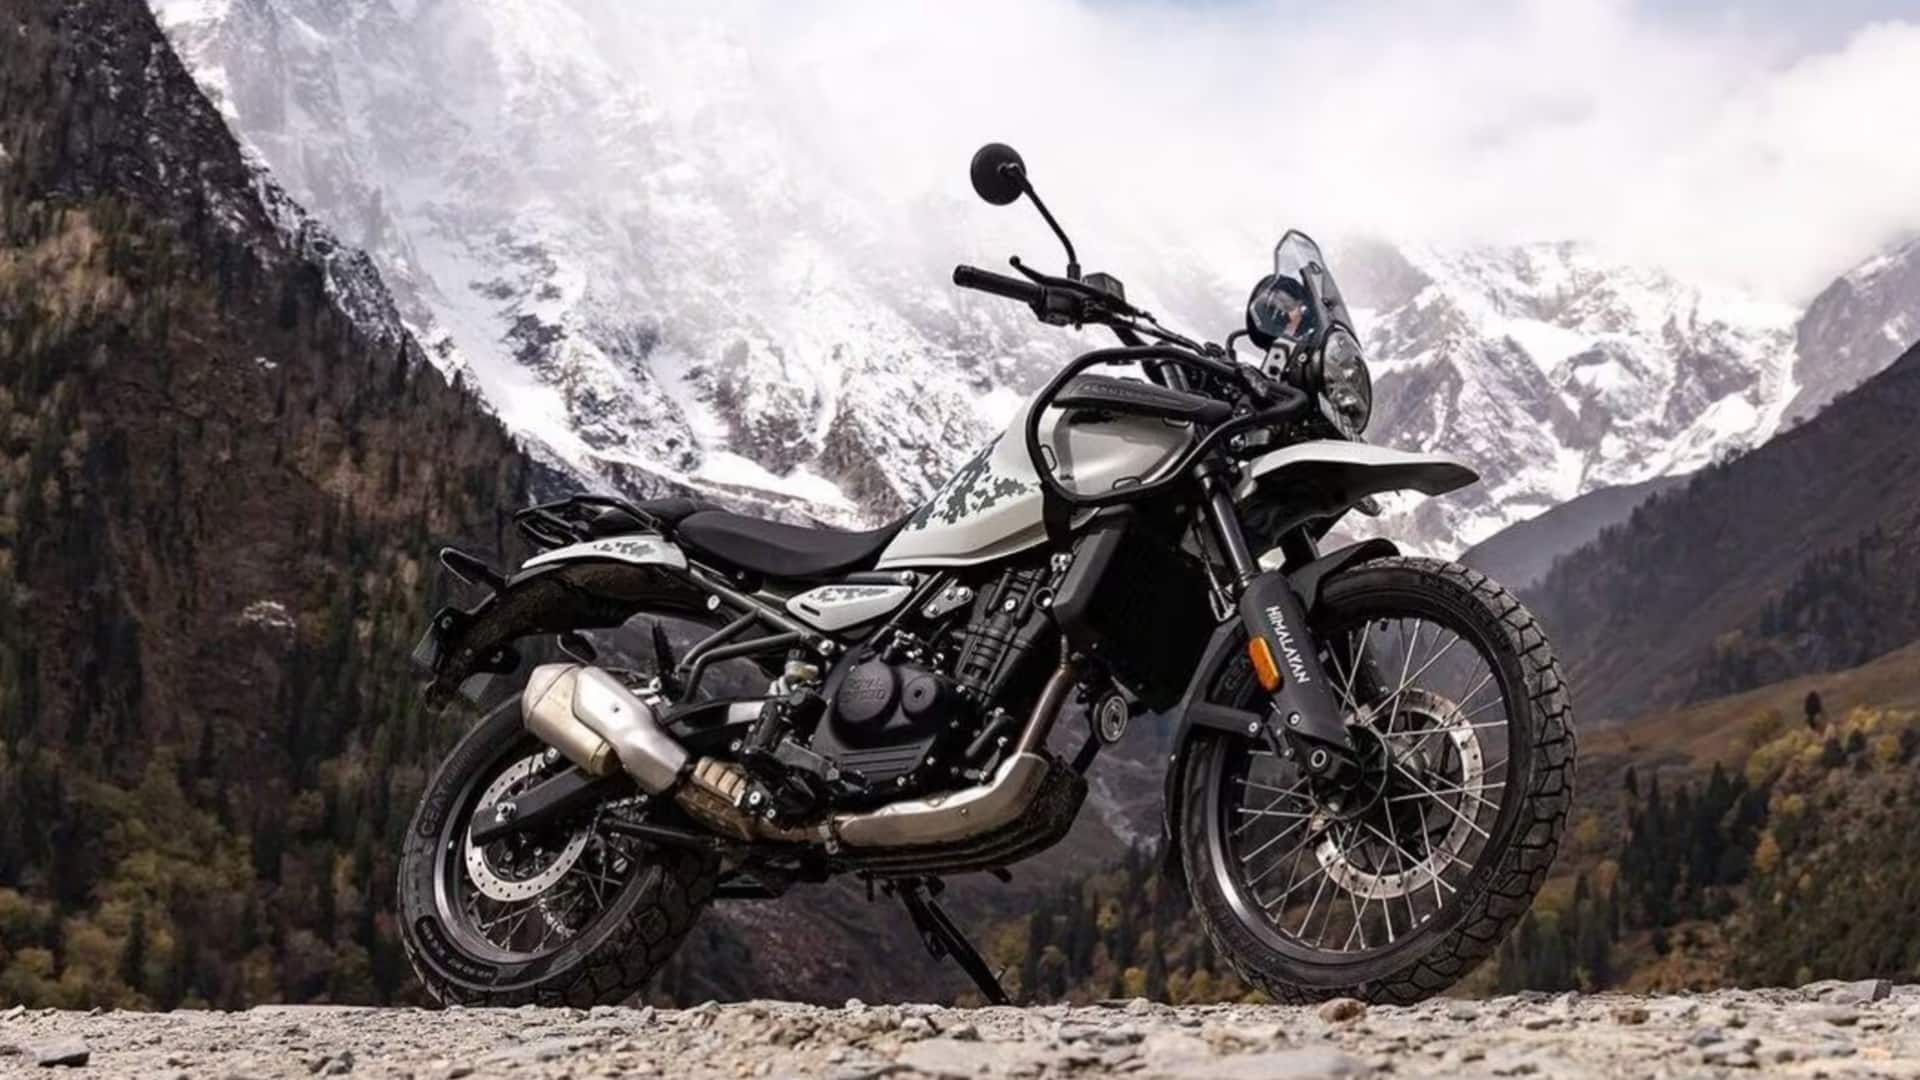 Prior to launch, specifications of new-generation Royal Enfield Himalayan revealed